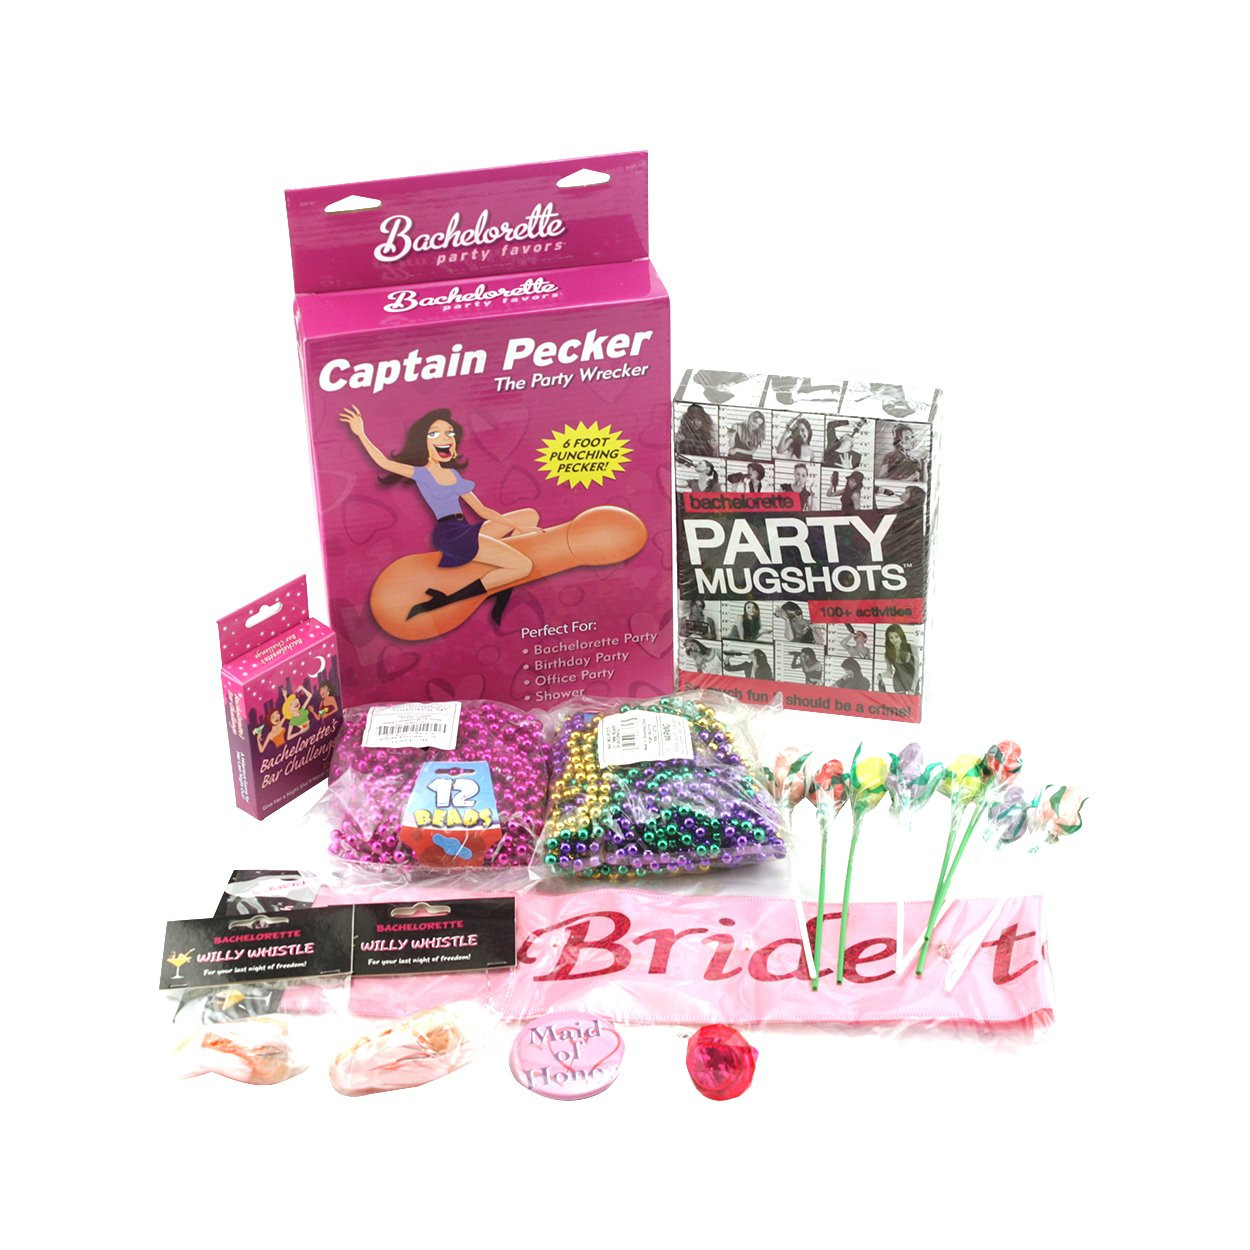 Naughty Bachelorette Party Ideas
 Naughty Bachelorette Party Games – Bachelorette Party Ideas